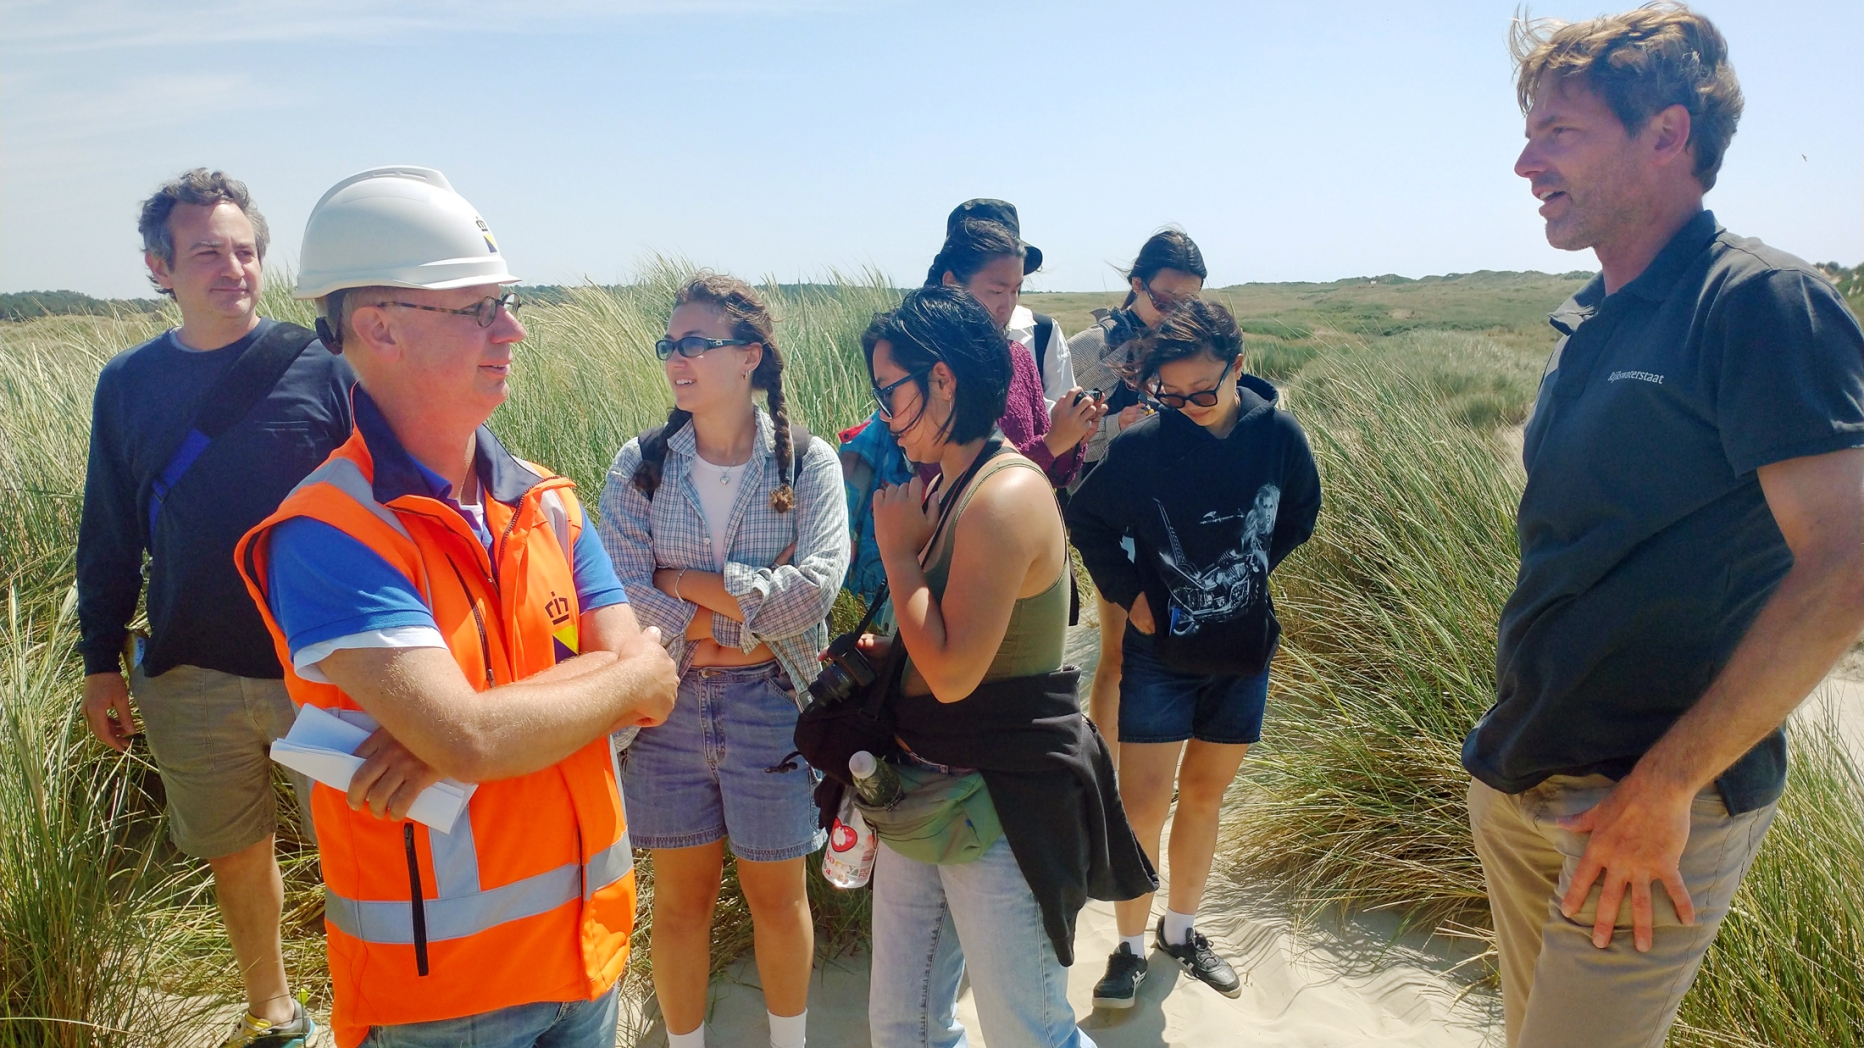 Meeting with Rob Zijlstra (Rijkswaterstaat) at the Ameland Island sand suppletion project